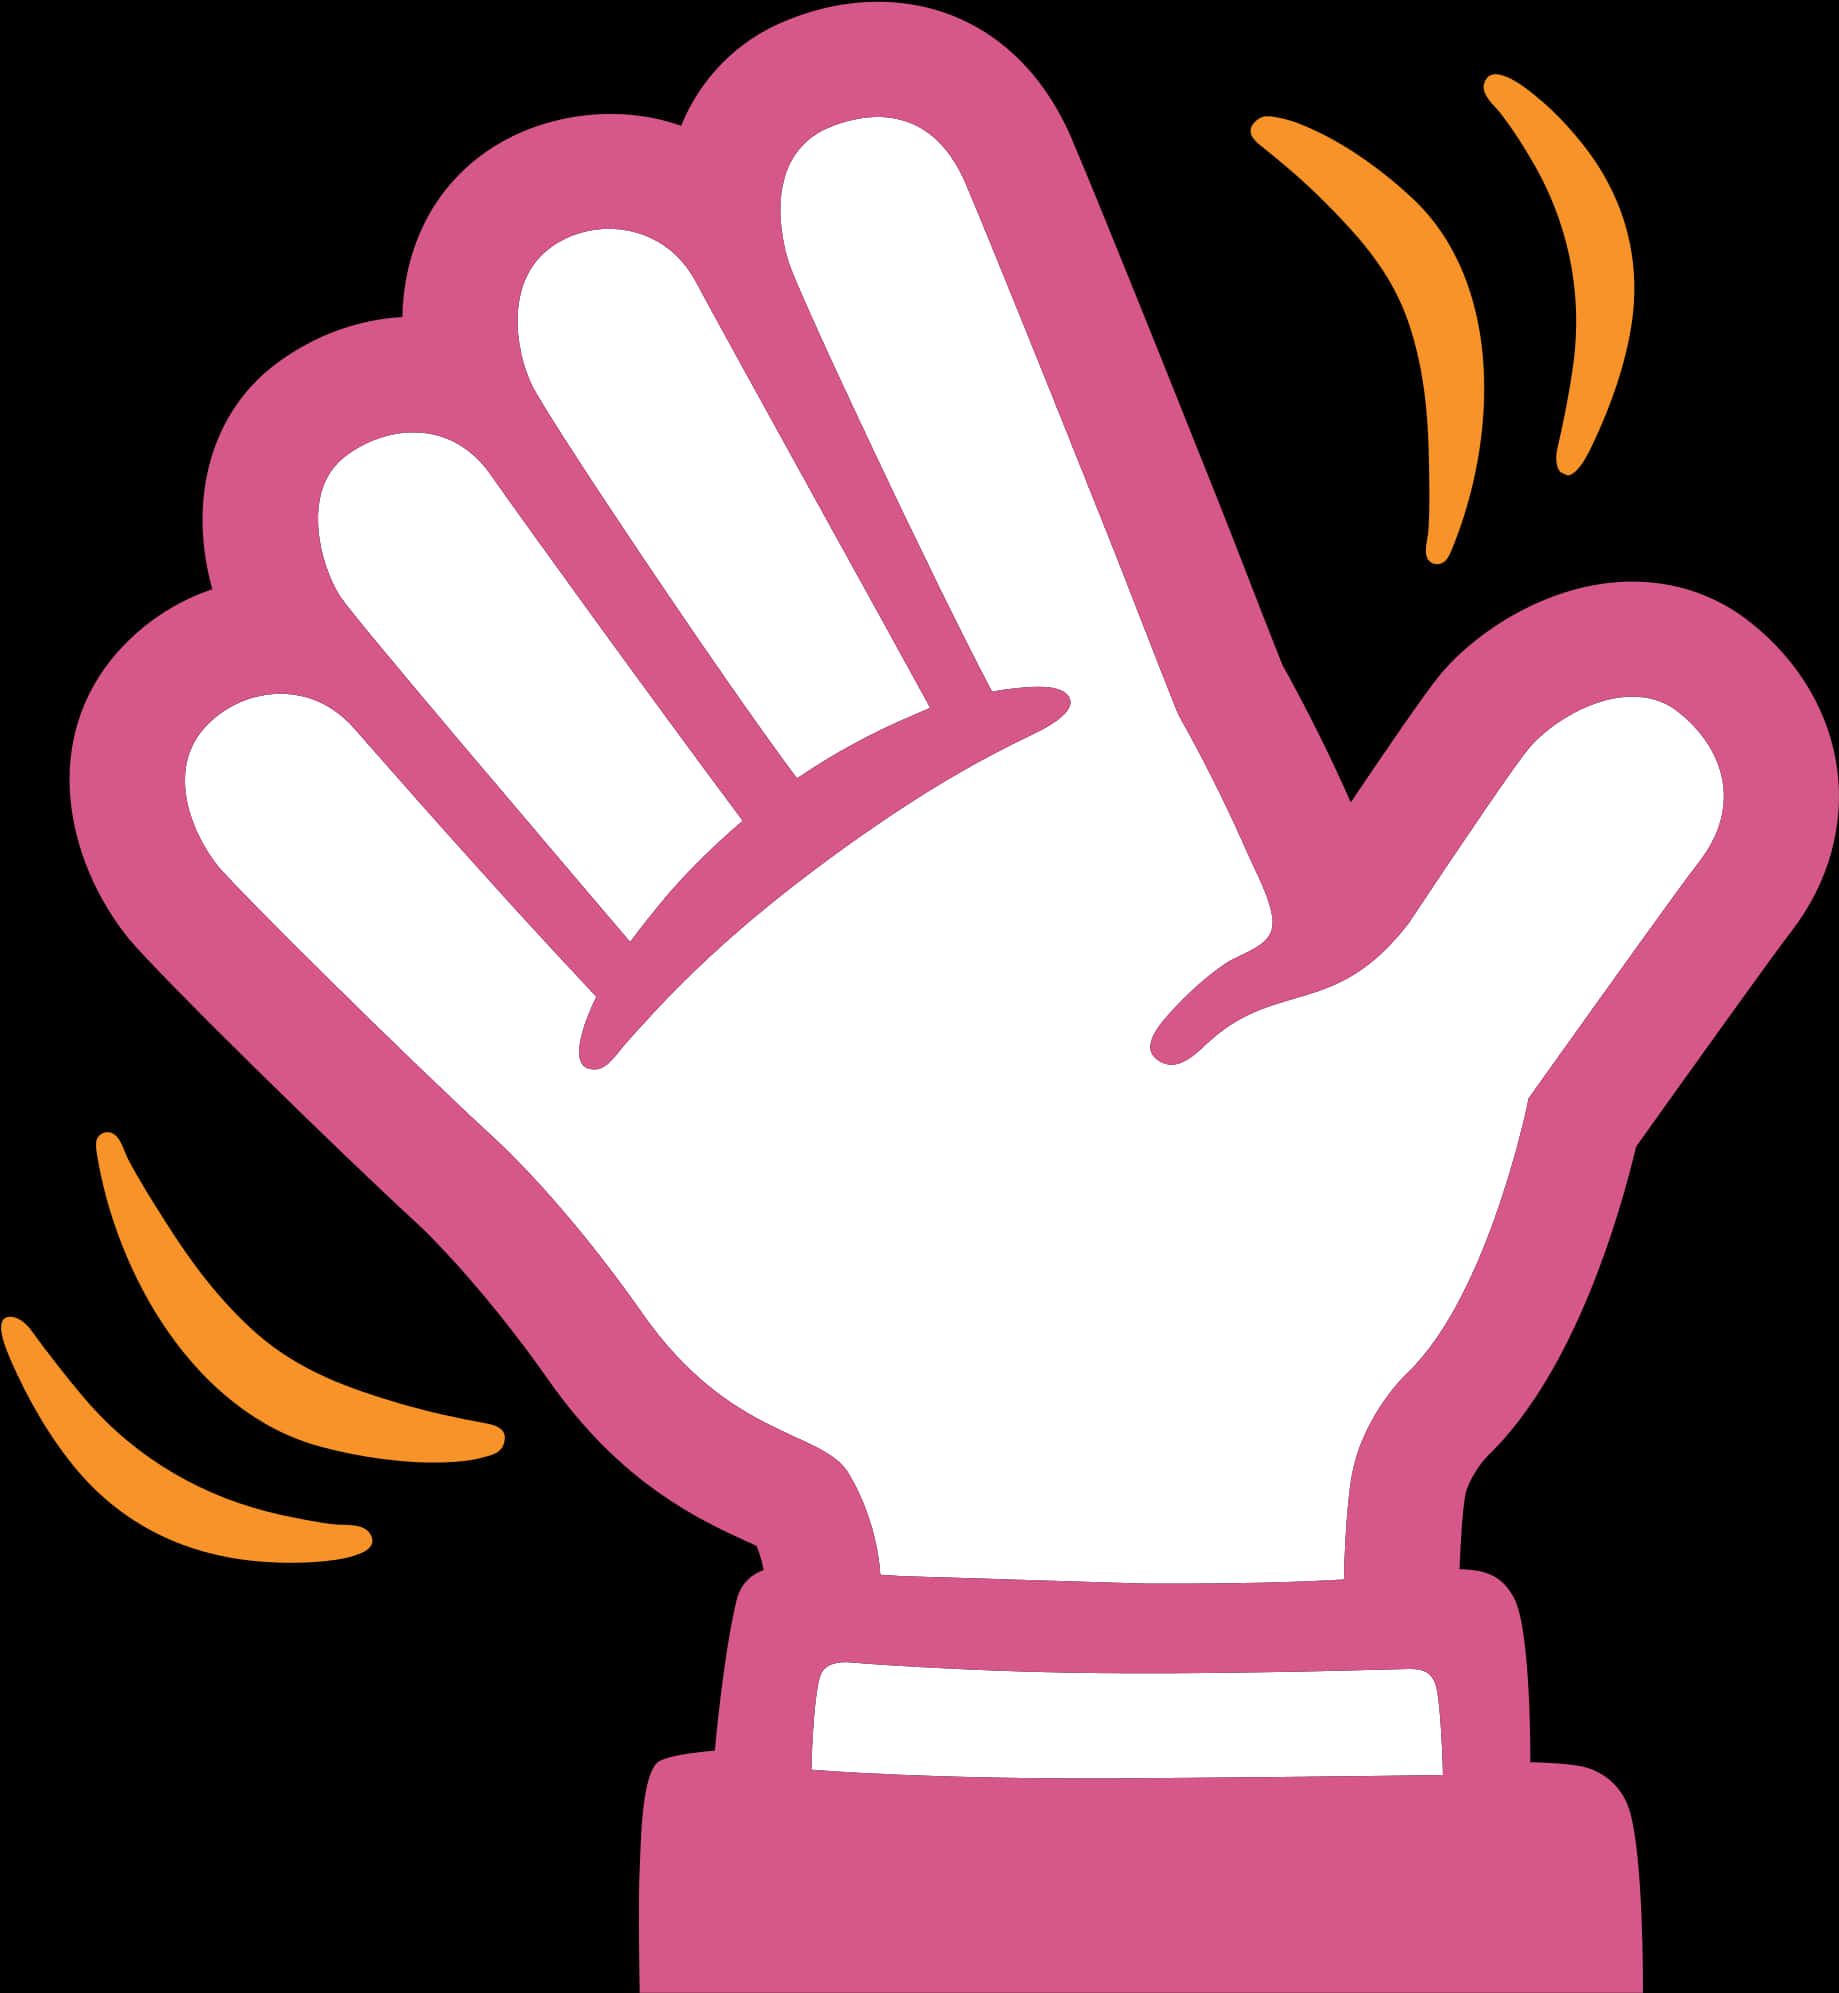 A Cartoon Hand With A Pink And White Hand Raised